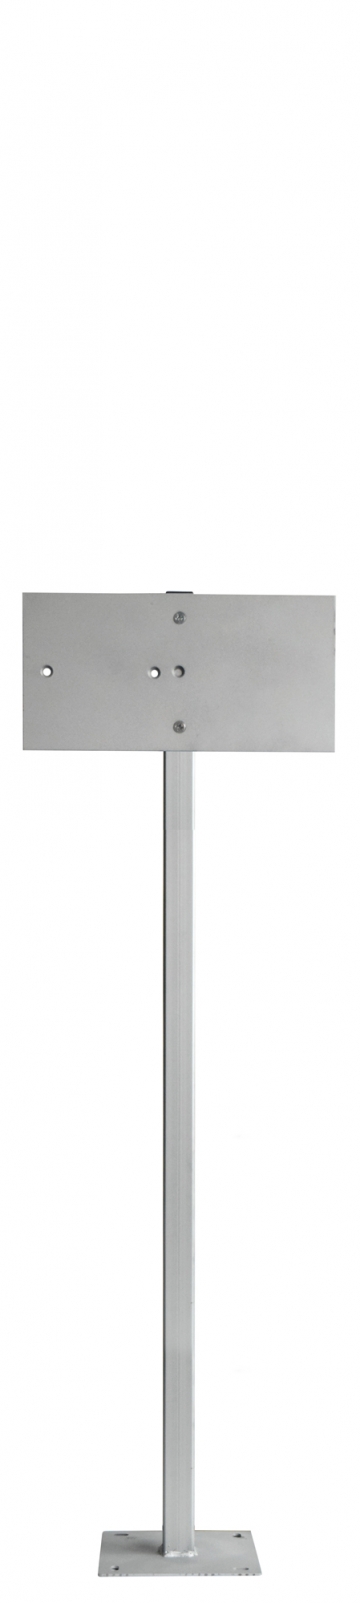 Telescopic vertical pole with mounting plate. Crdits : 